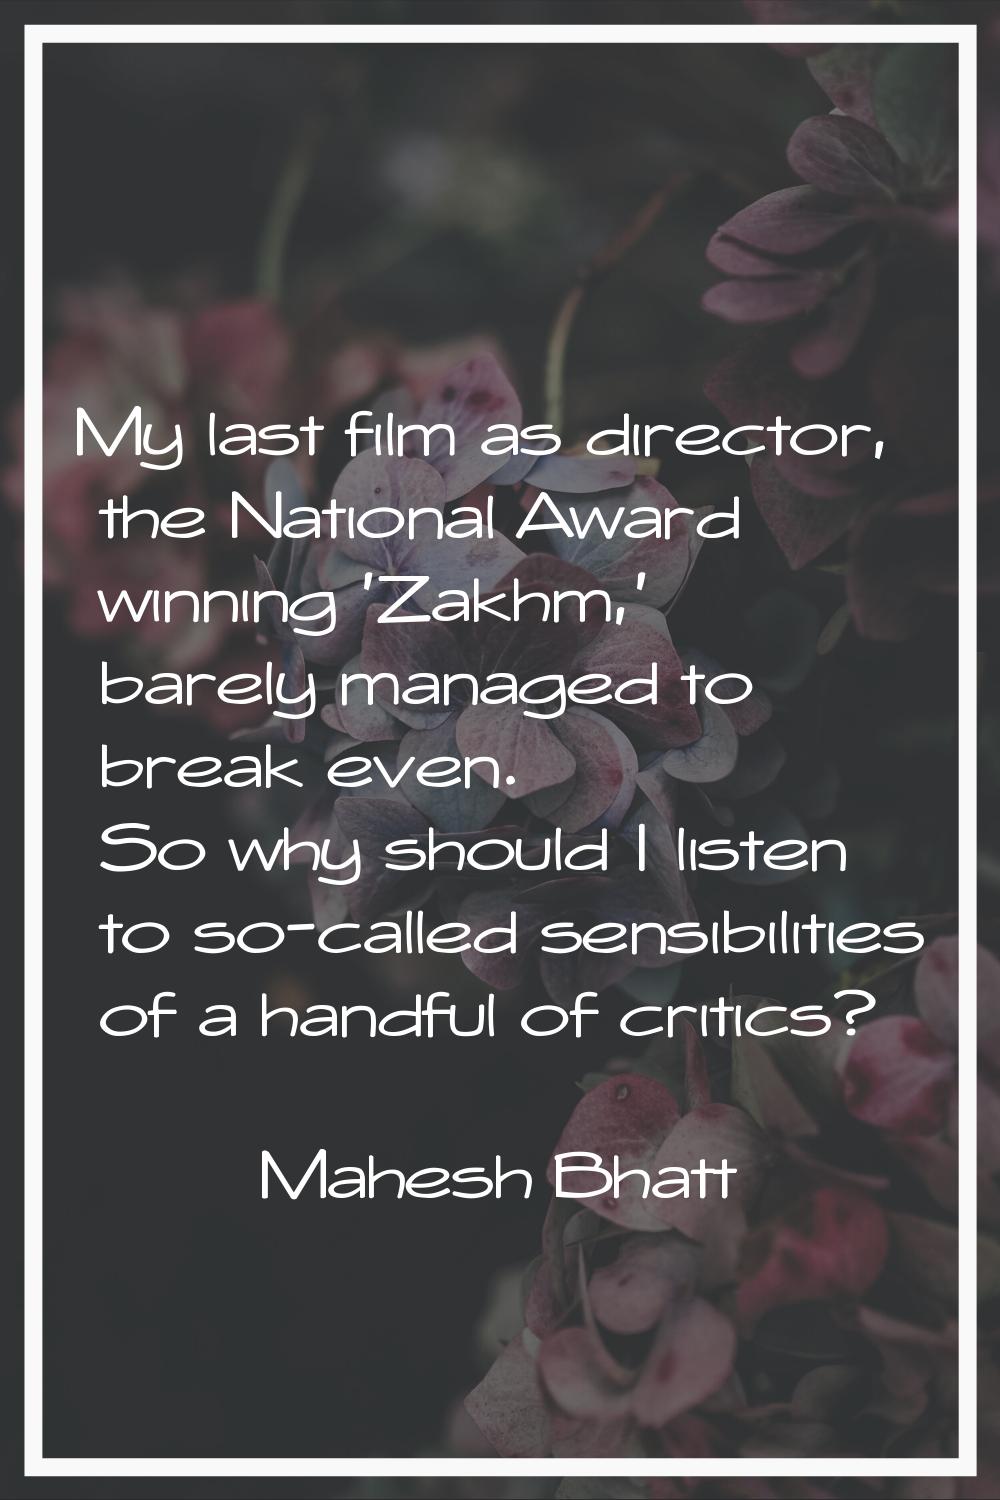 My last film as director, the National Award winning 'Zakhm,' barely managed to break even. So why 